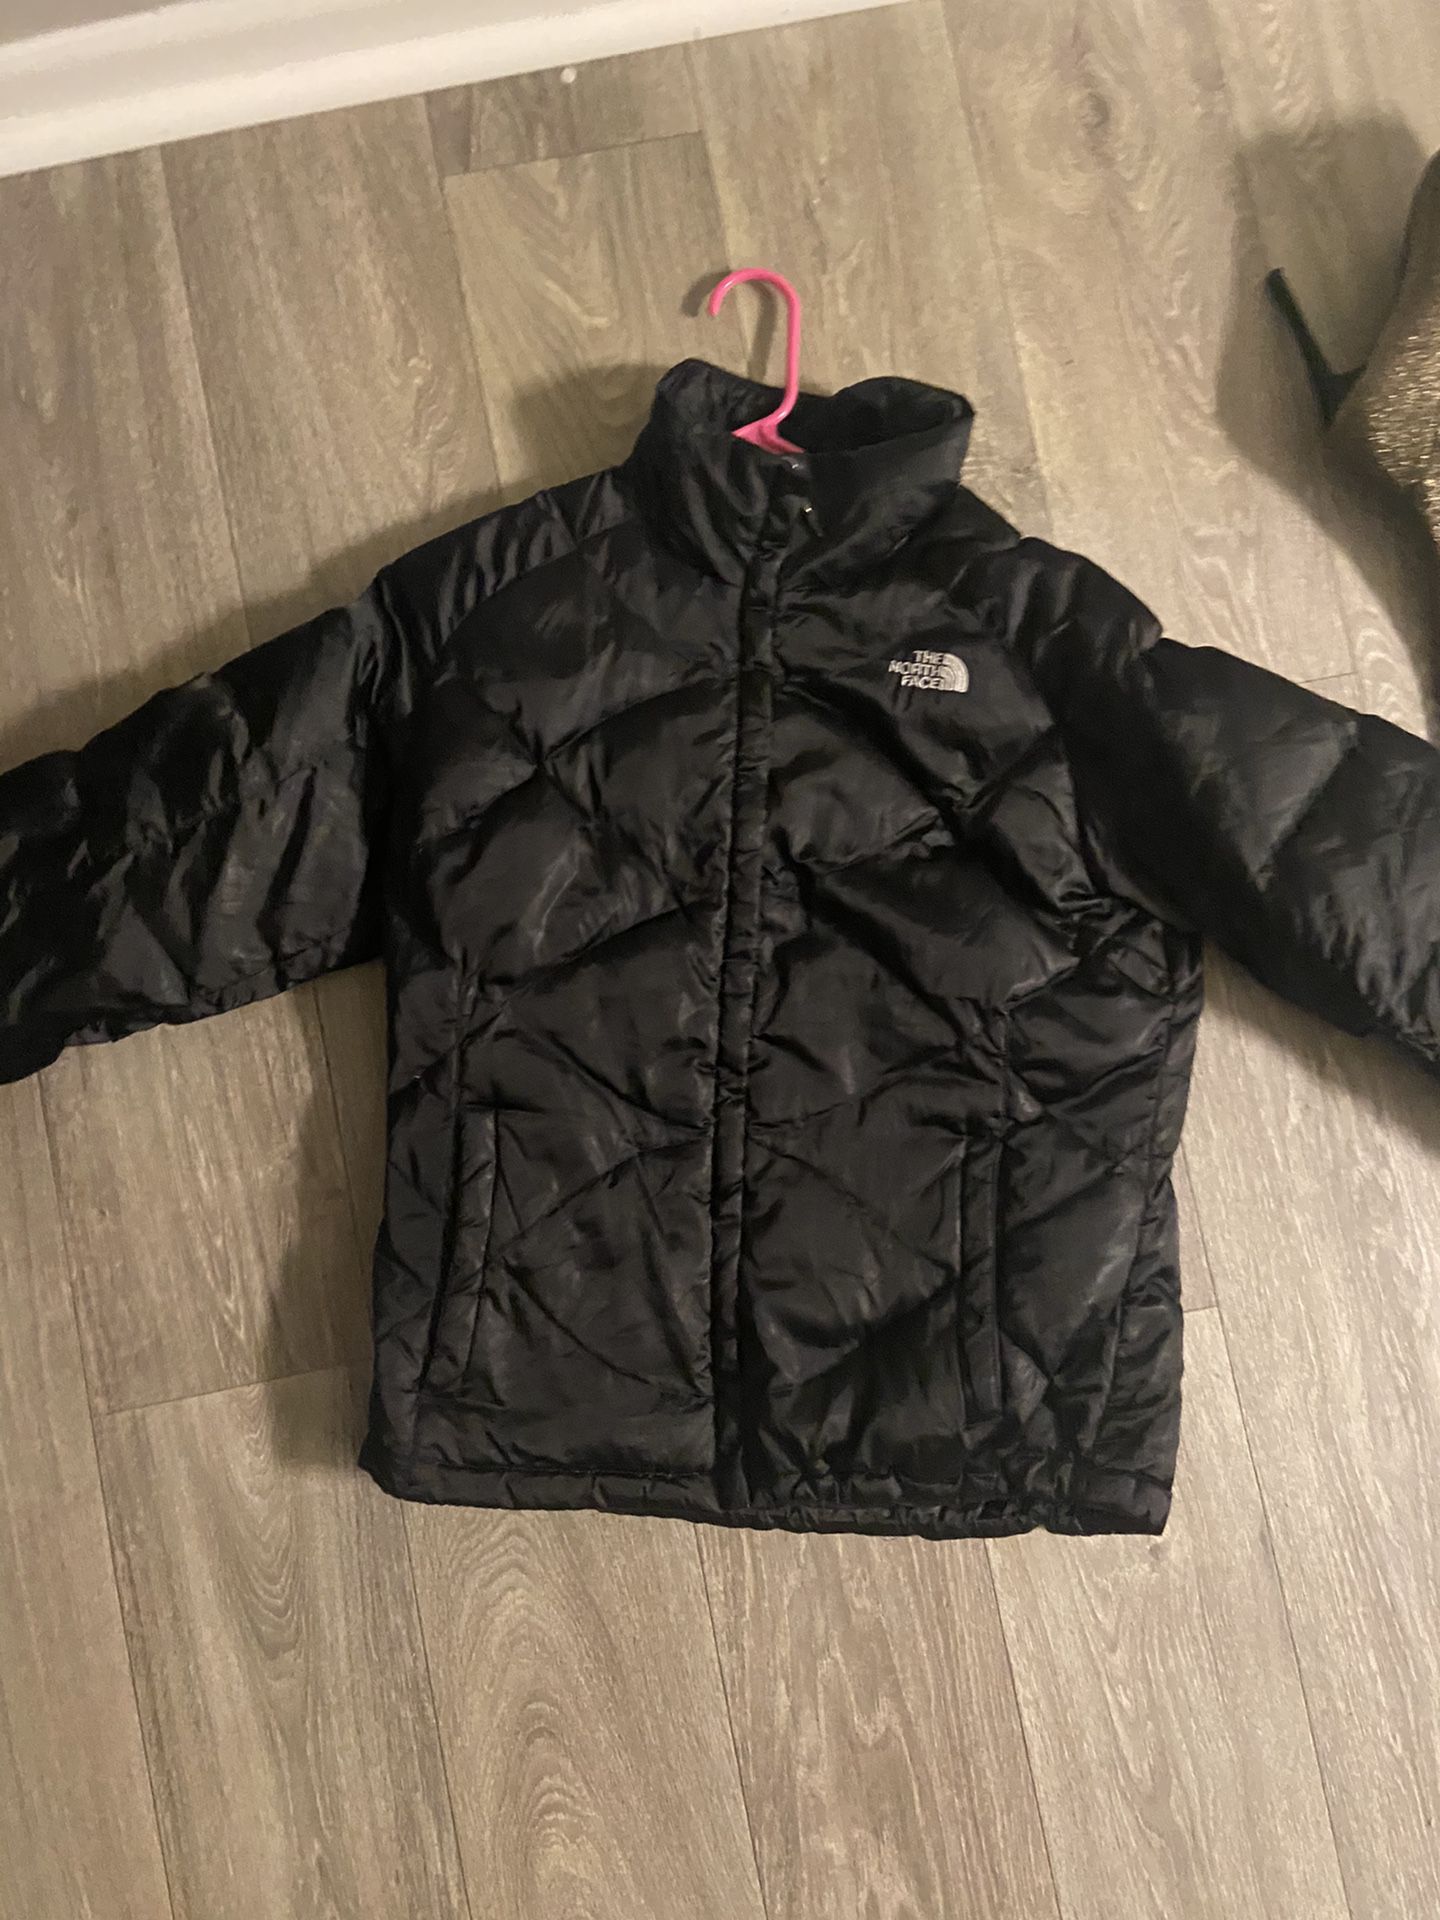 Women’s North face coat and boots